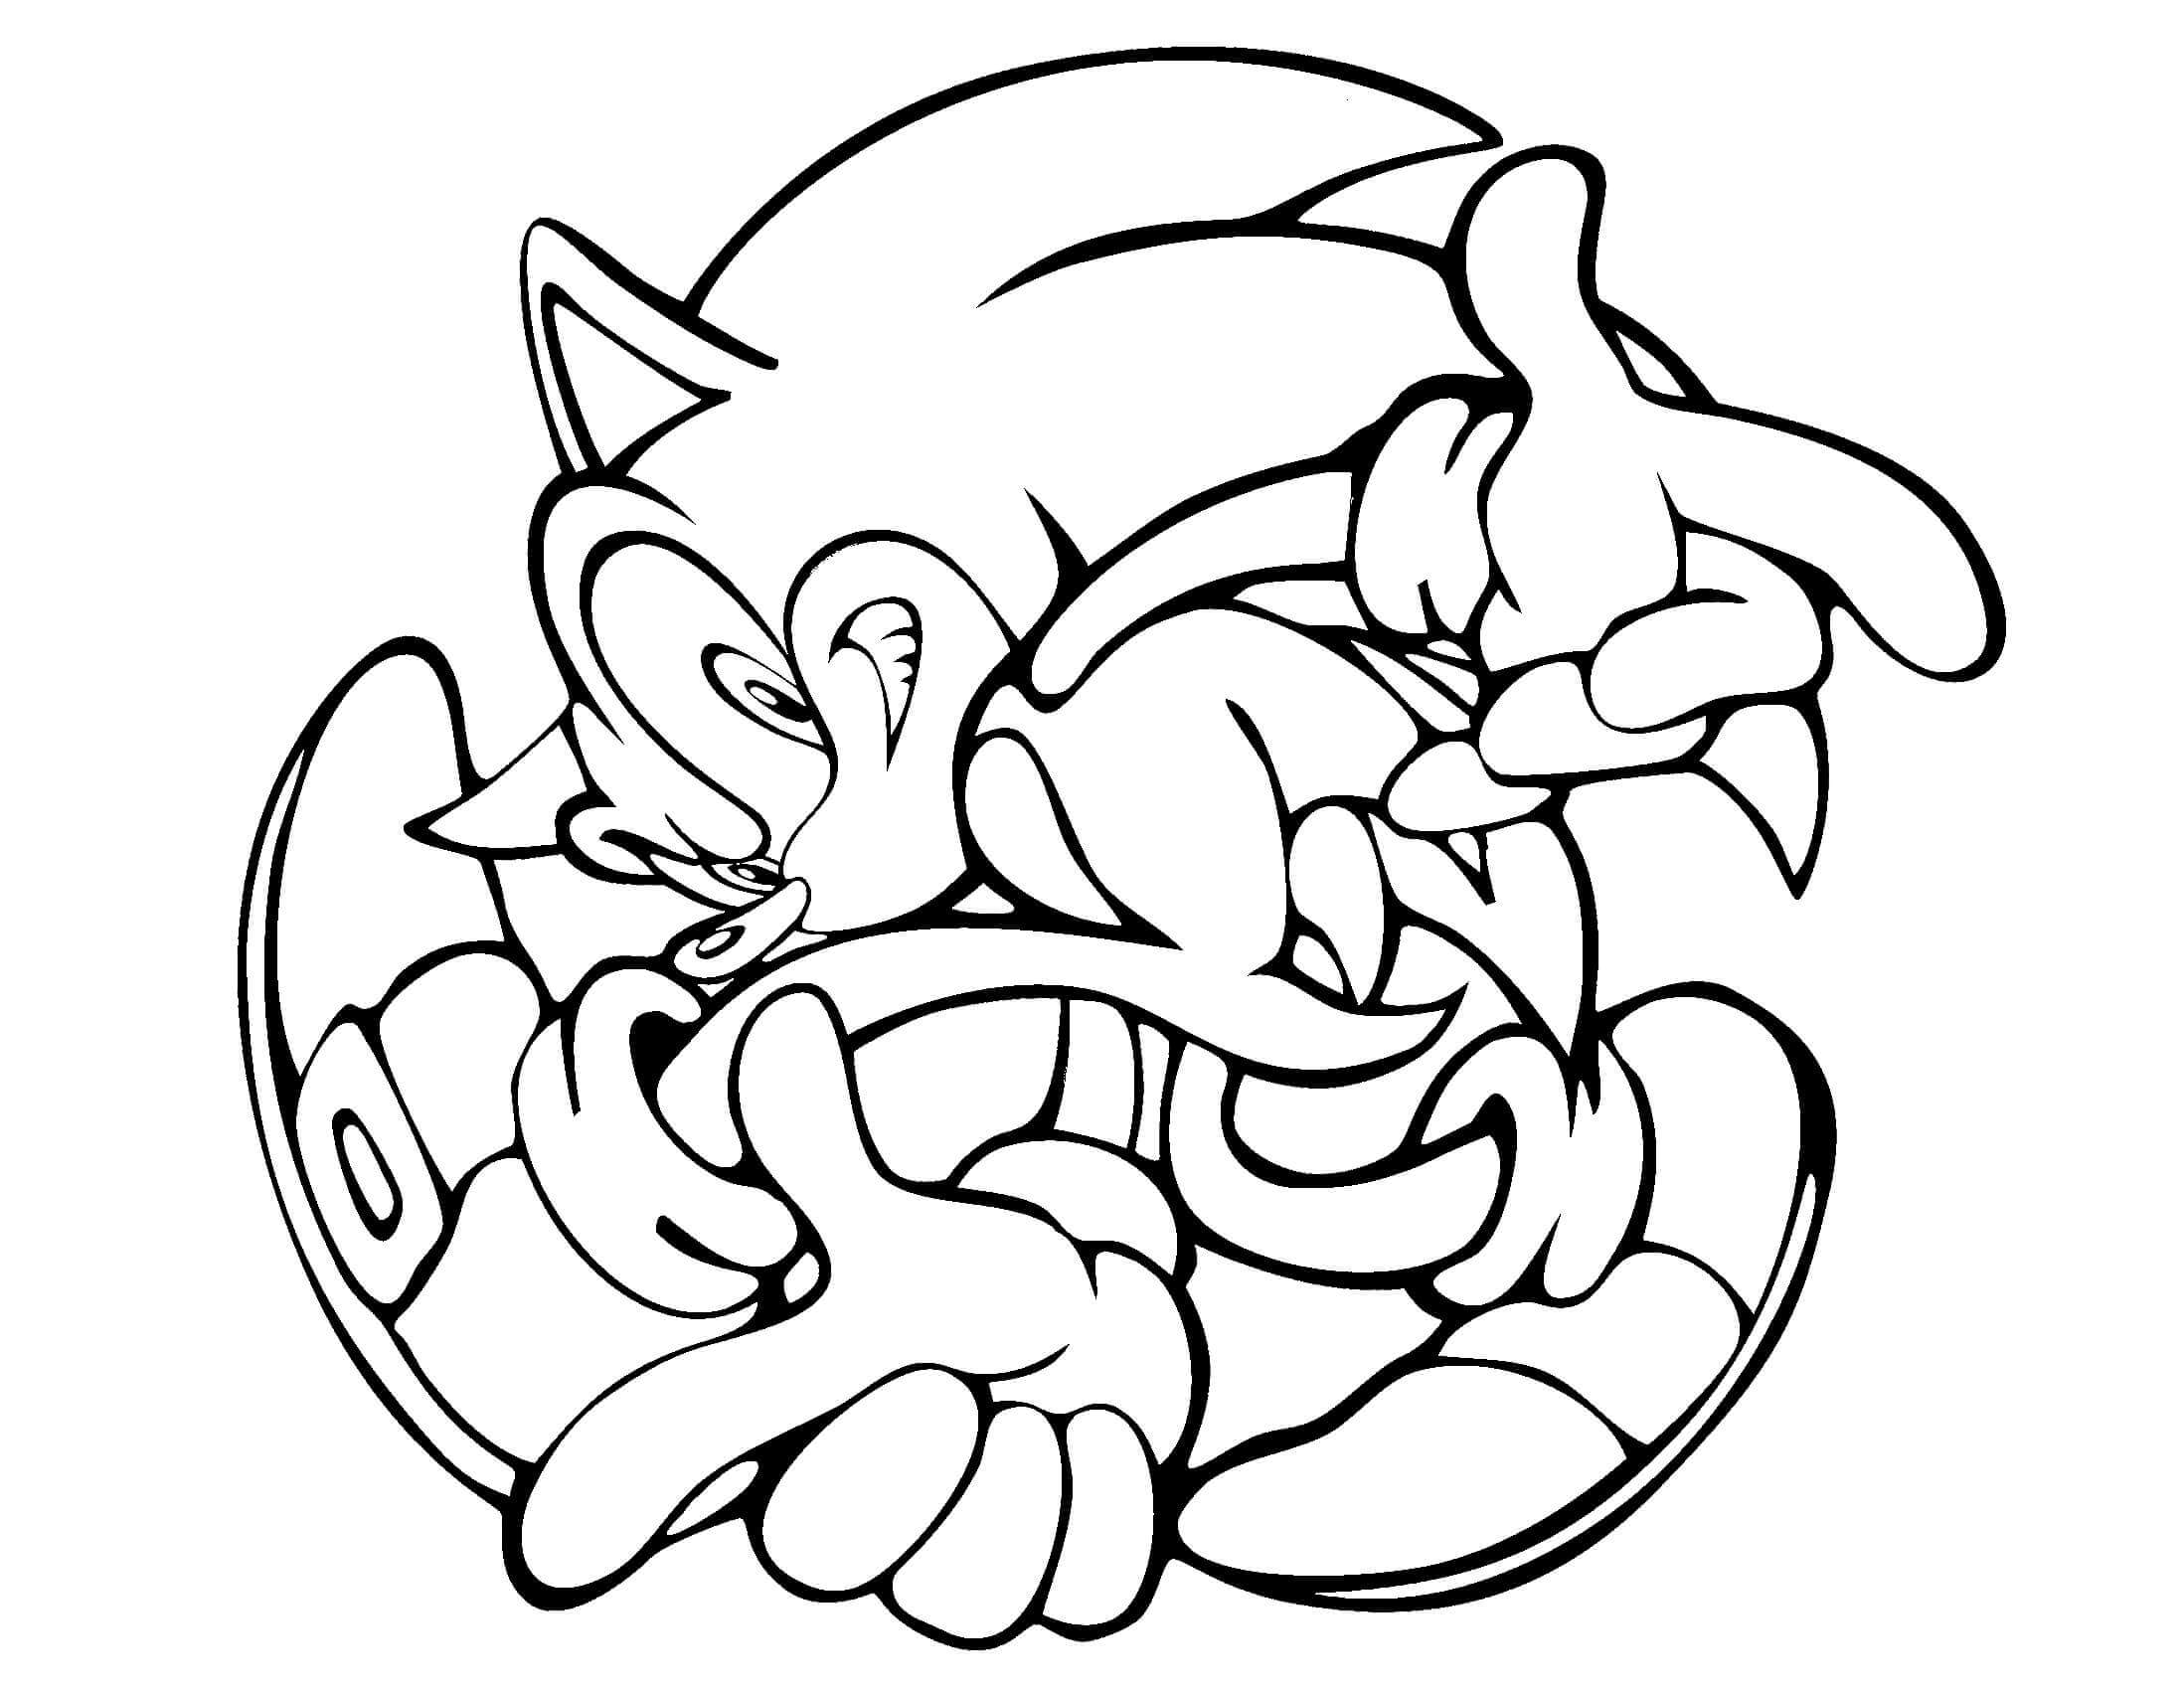 Cool Sonic the Hedgehog Coloring Pages